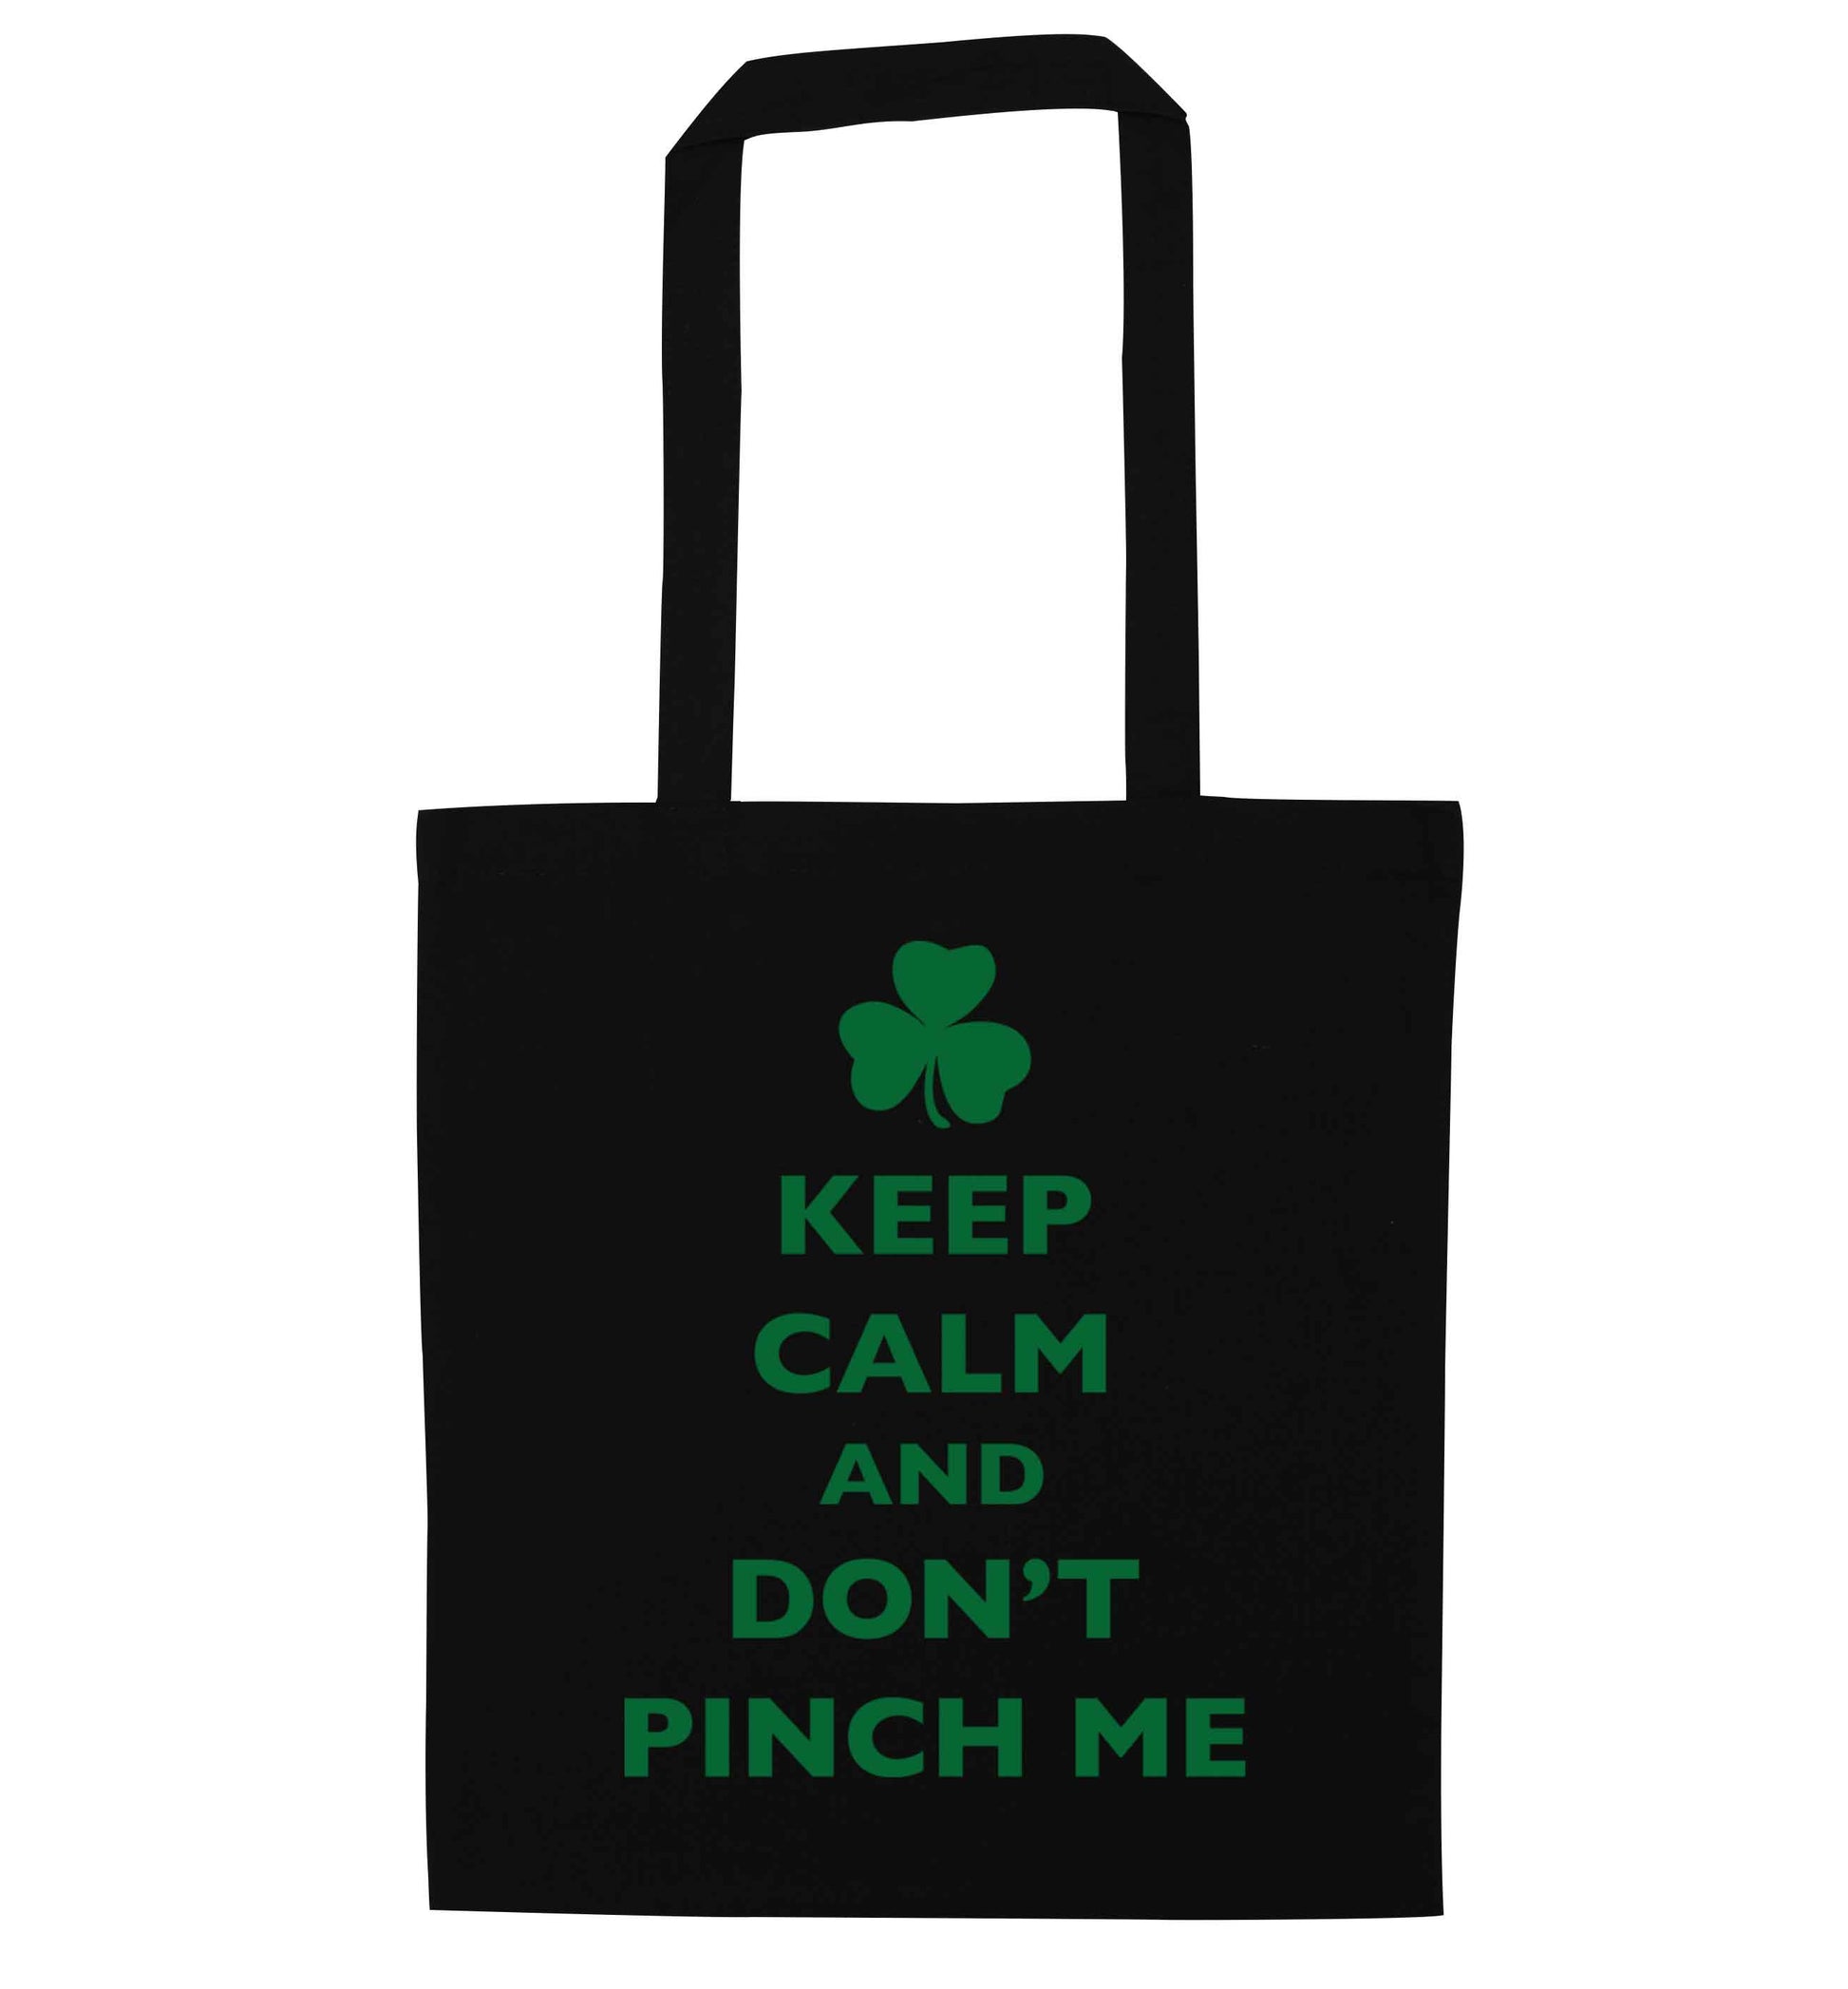 Keep calm and don't pinch me black tote bag